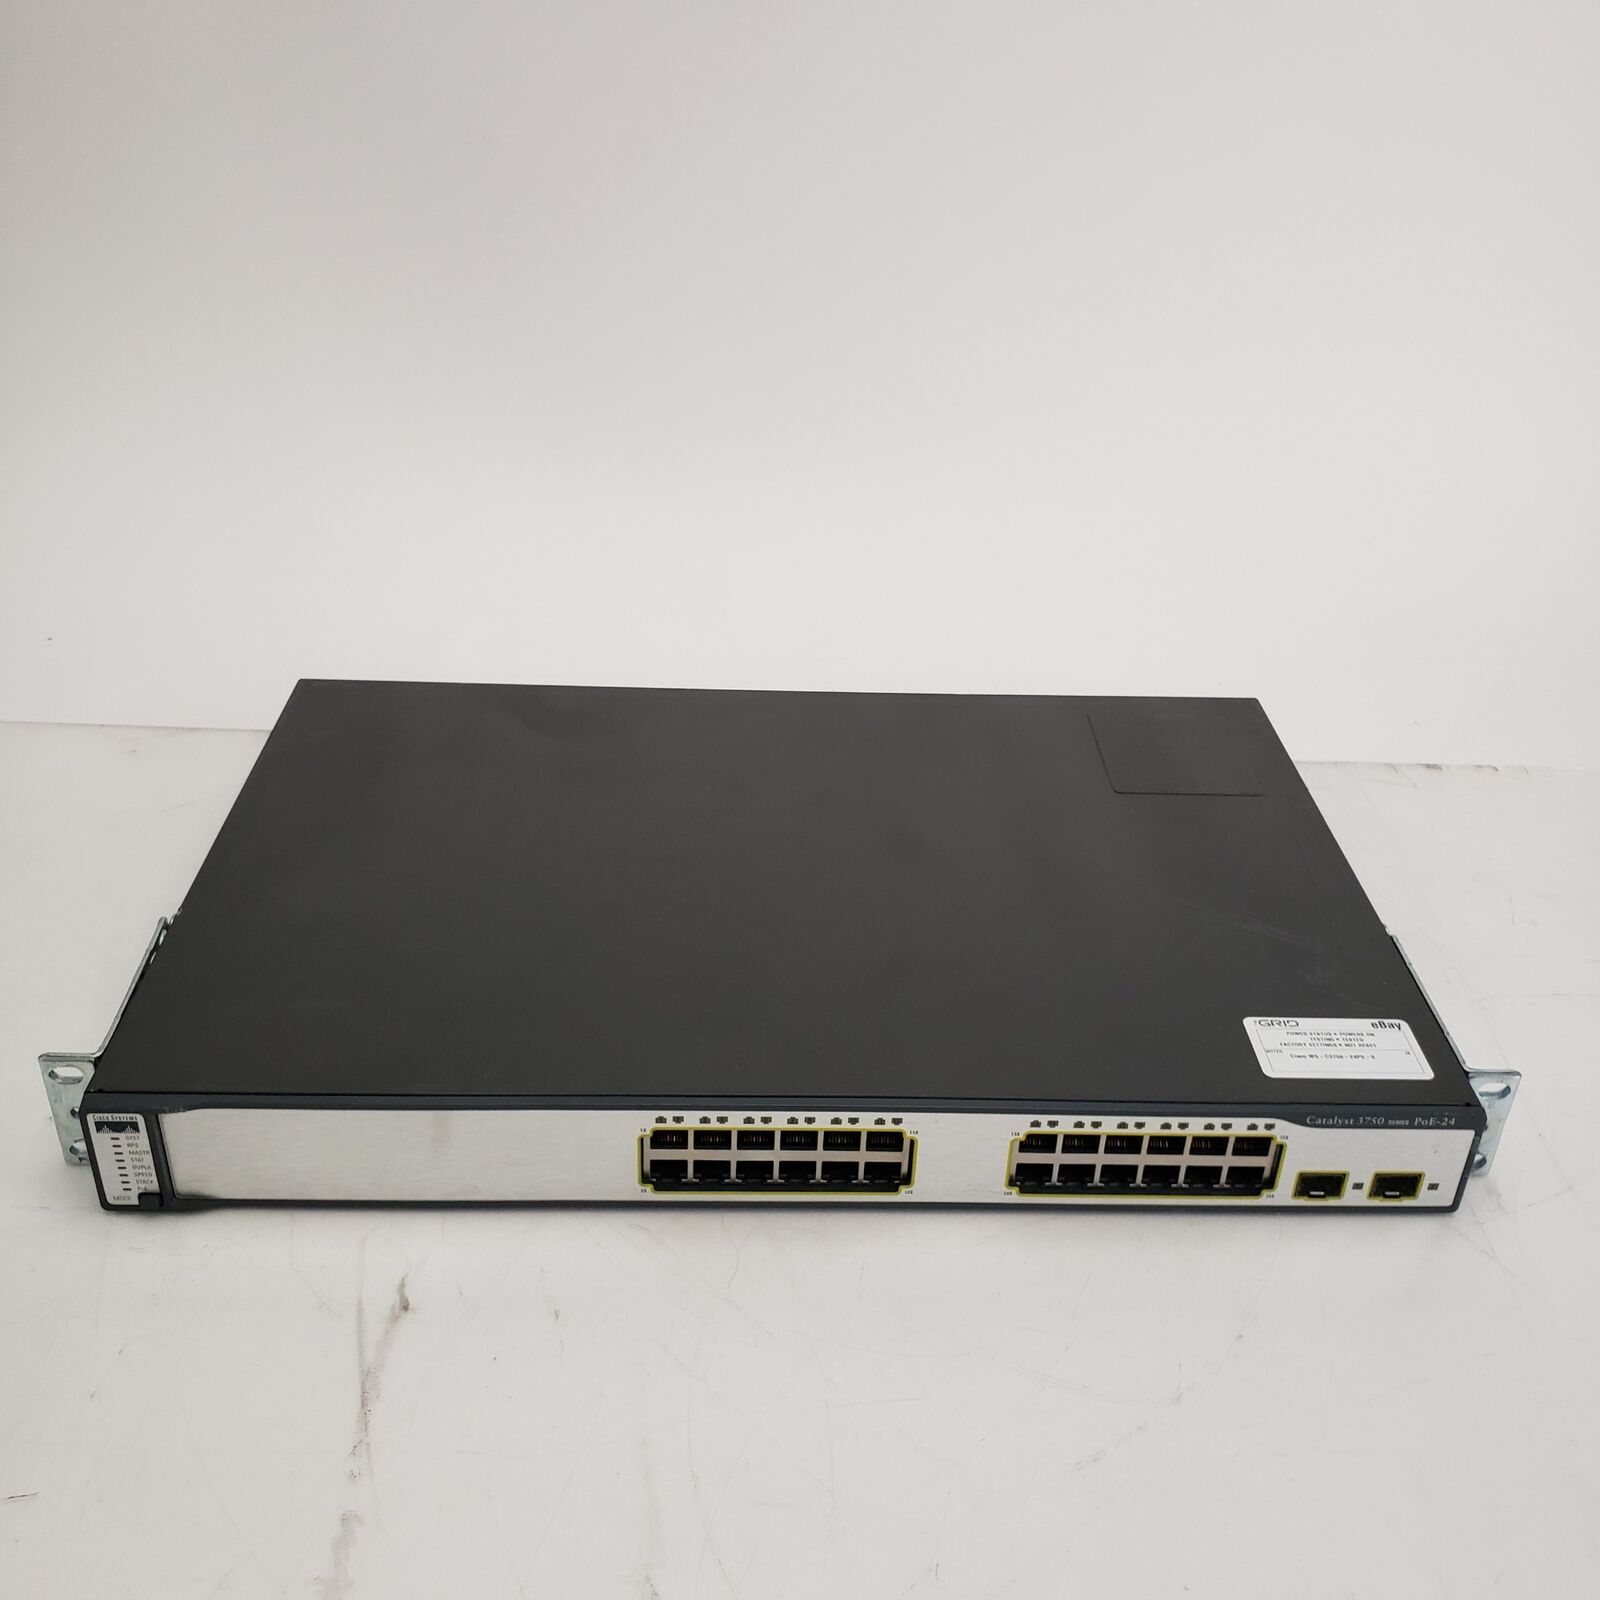 Cisco WS-C3750-24PS-S 24-Port Ethernet Switch - Tested (#HGV)